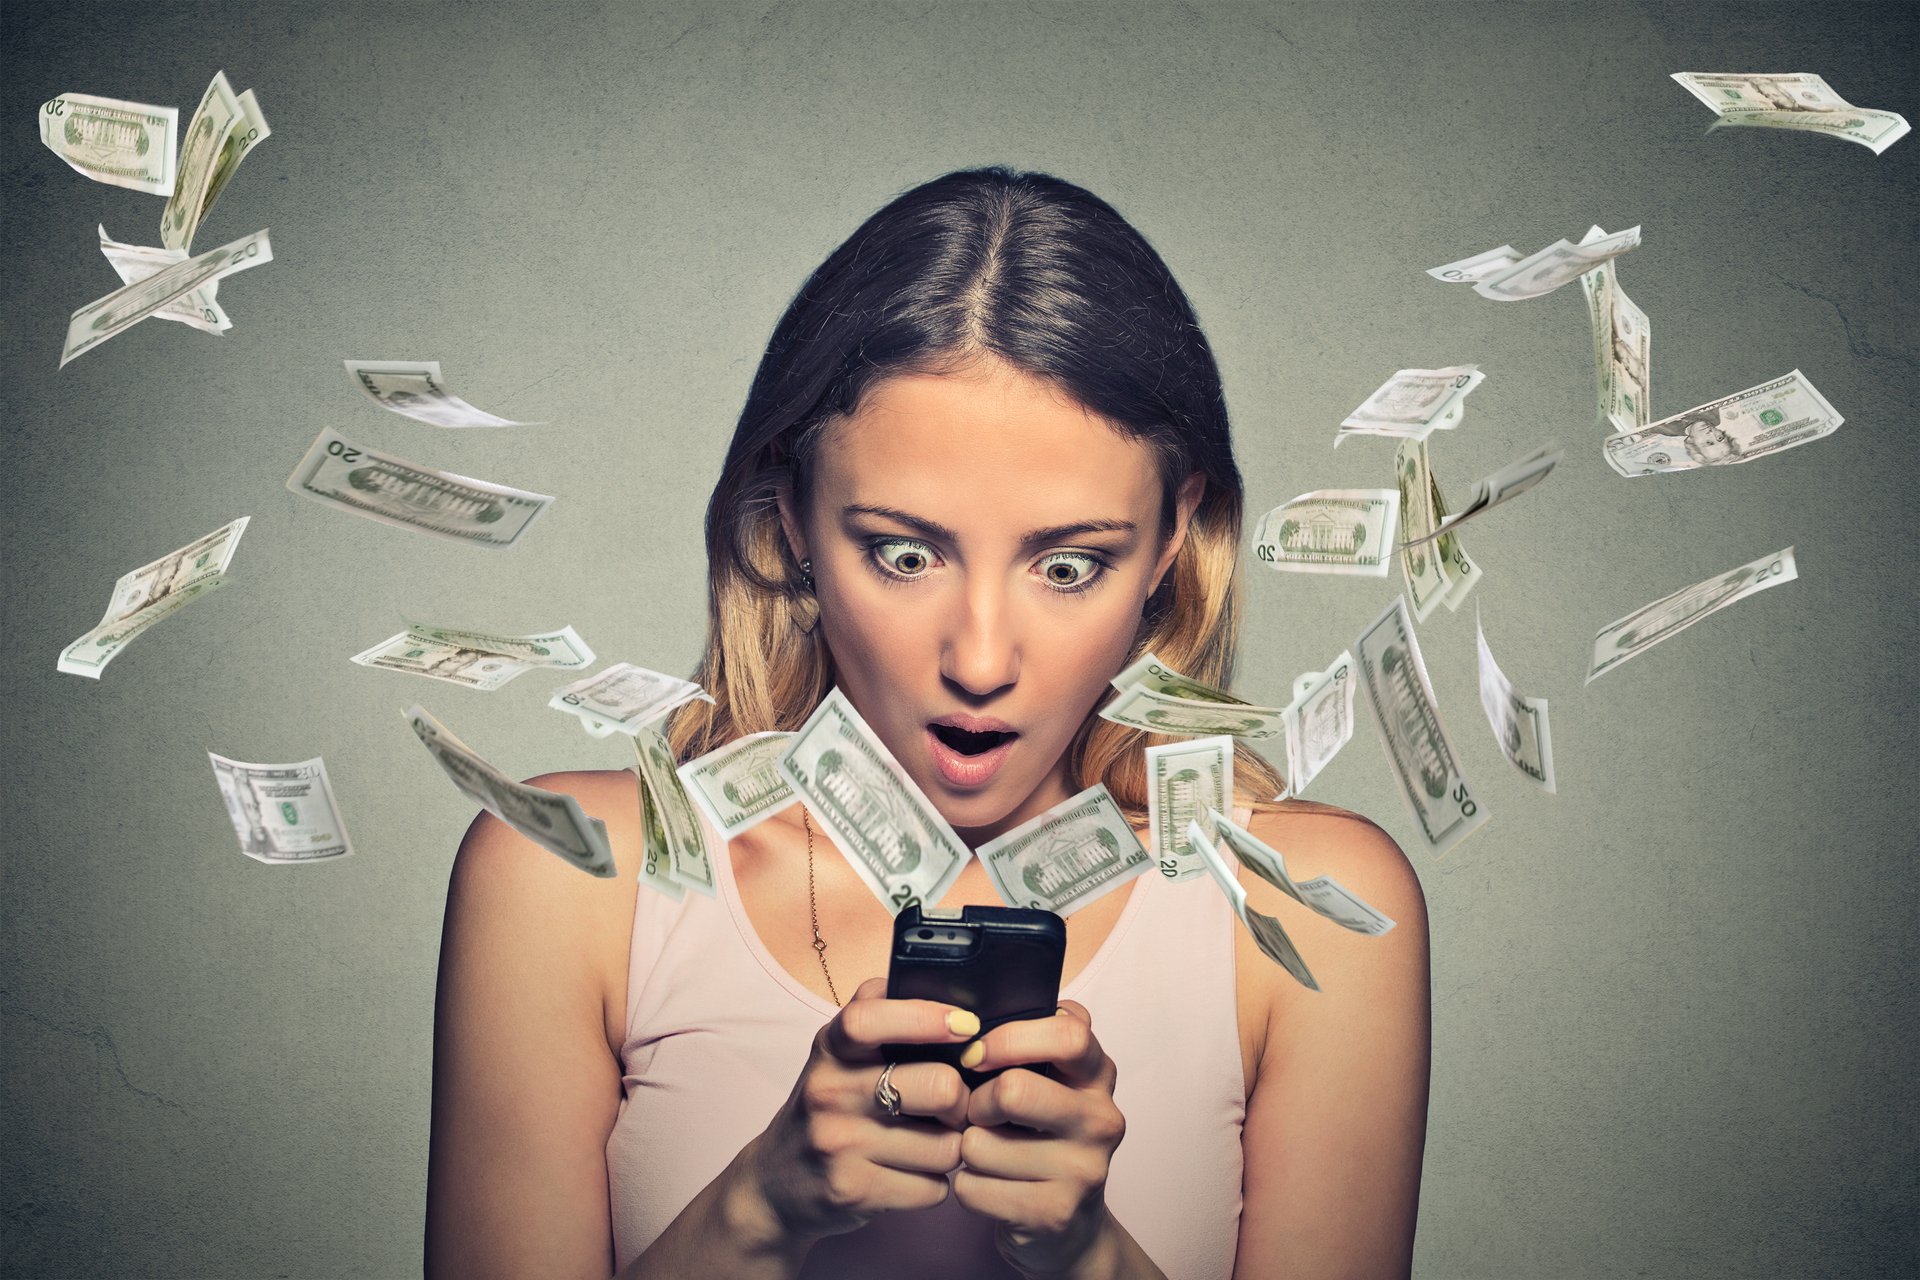 Shocked-looking woman staring at dollar bills flying out of her cellphone.